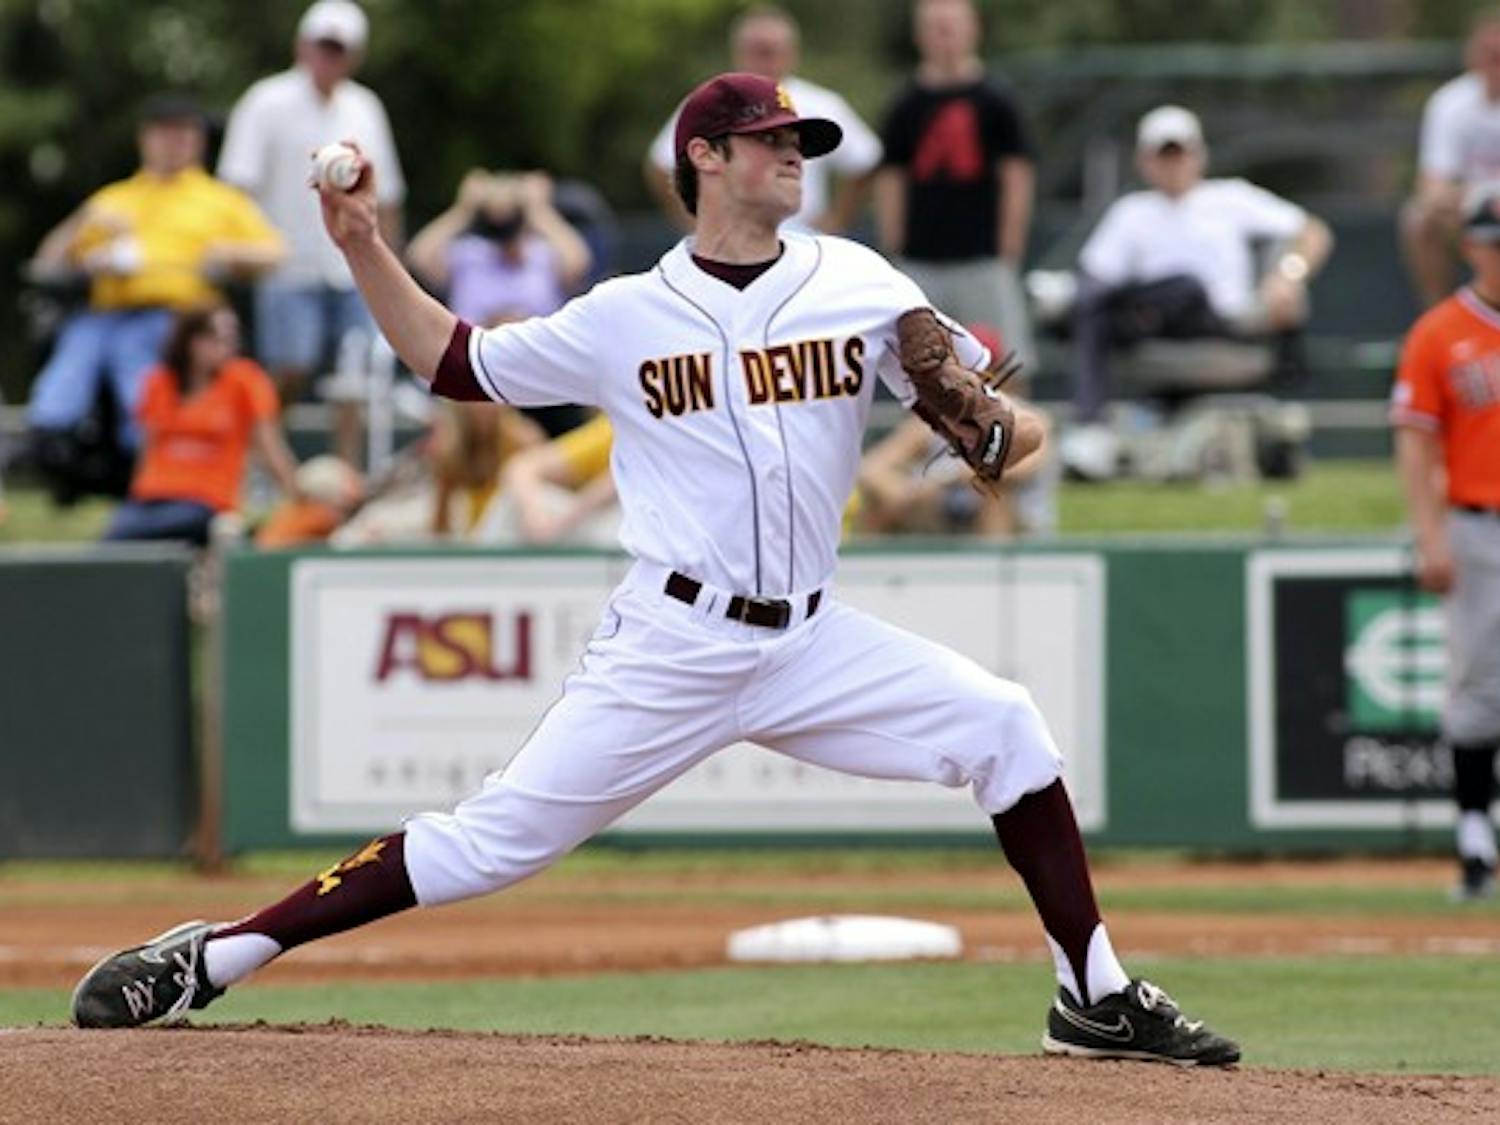 Darin Gillies throws a pitch in a game against Oregon State on April 7. Gillies and the Sun Devils’ pitching staff look to continue their solid season against the Trojans. (Photo by Sam Rosenbaum)